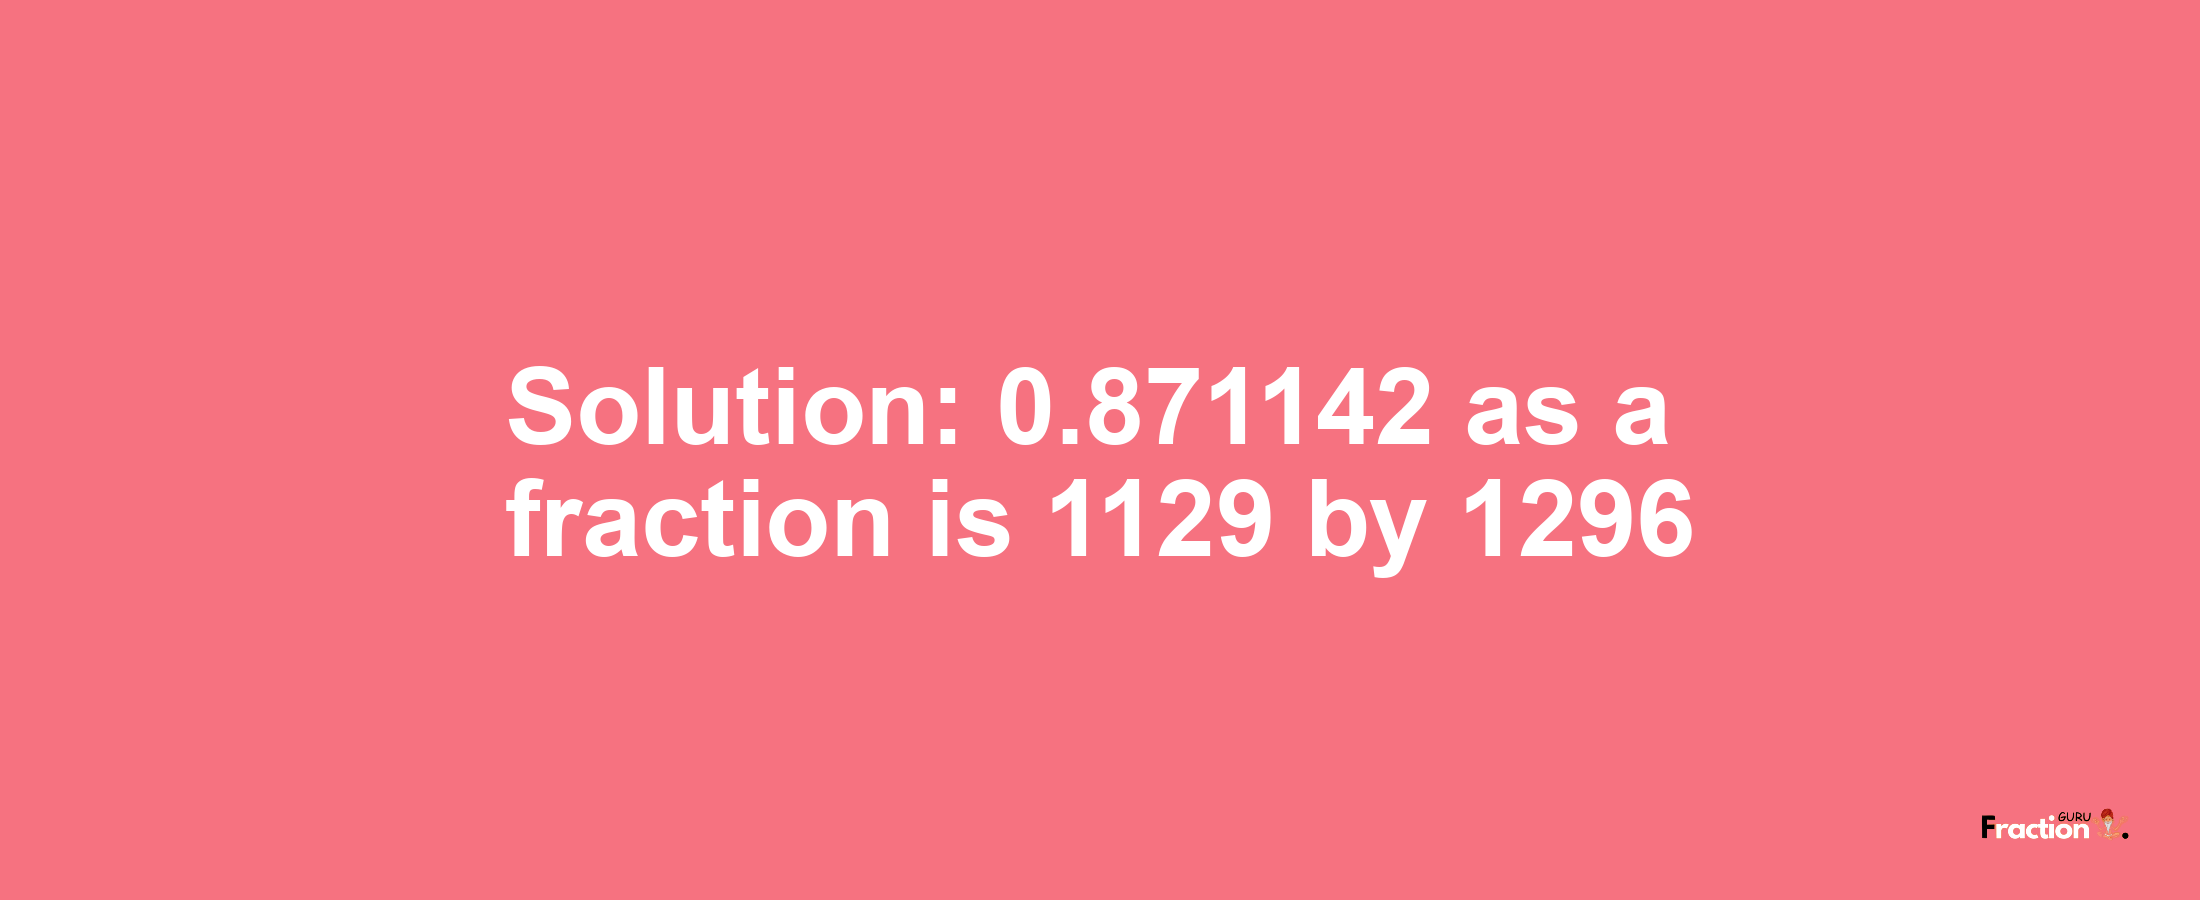 Solution:0.871142 as a fraction is 1129/1296